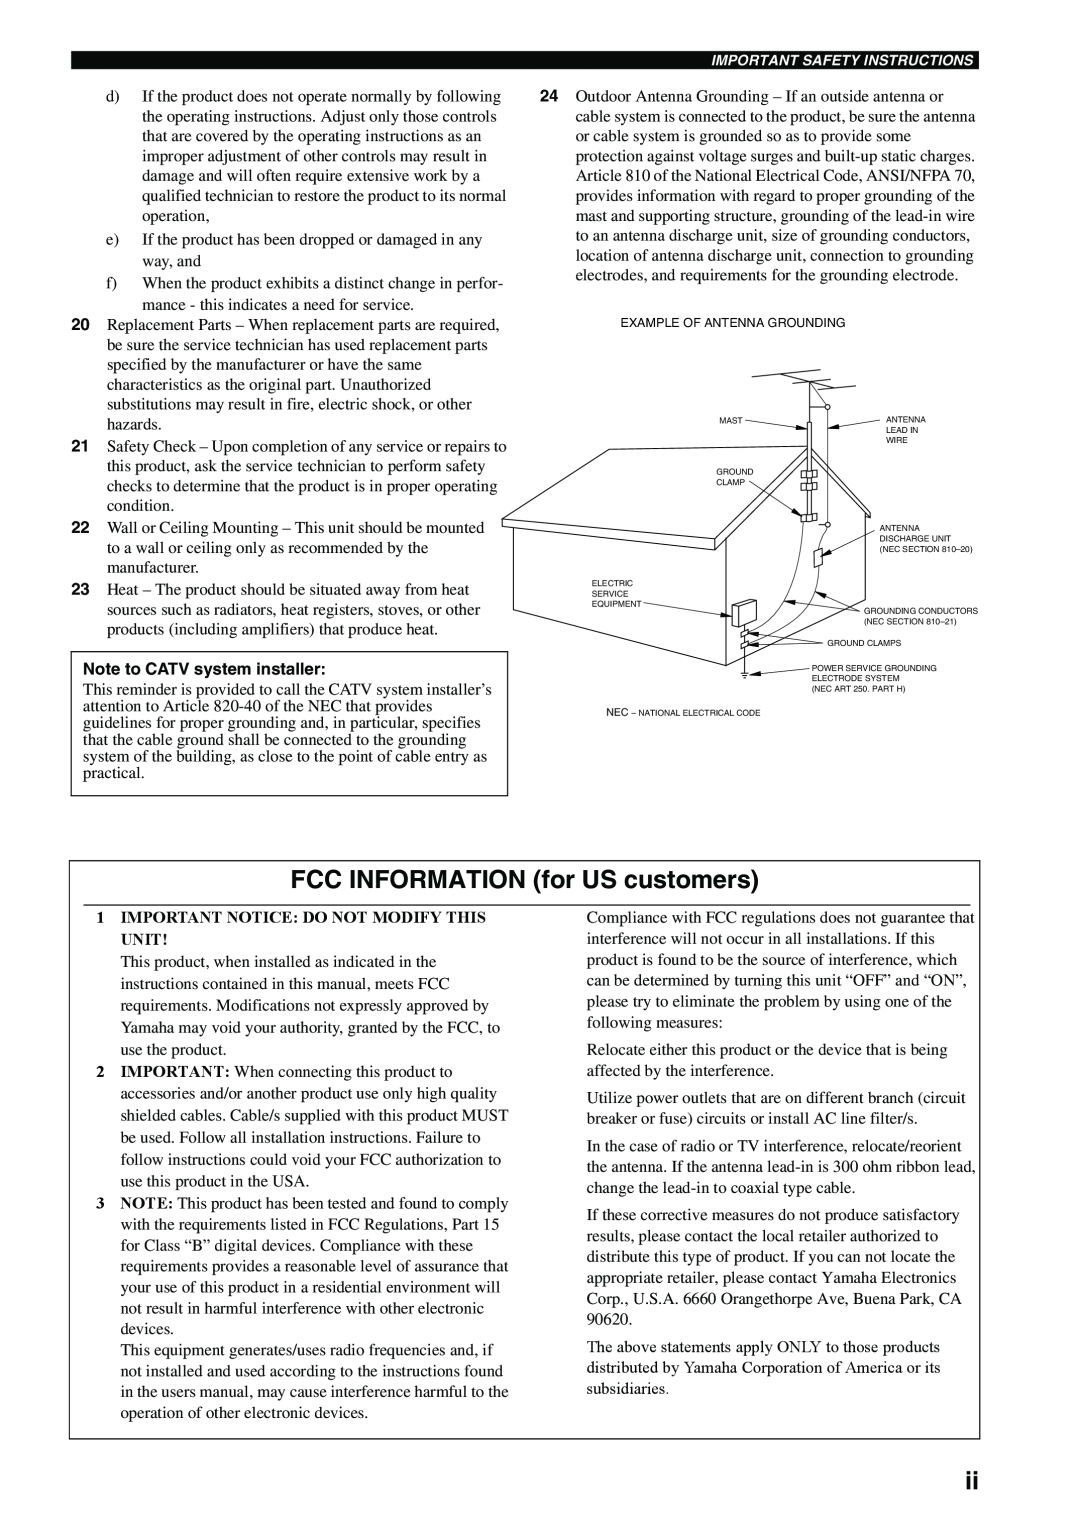 Yamaha HTR-5940 owner manual FCC INFORMATION for US customers, Note to CATV system installer 